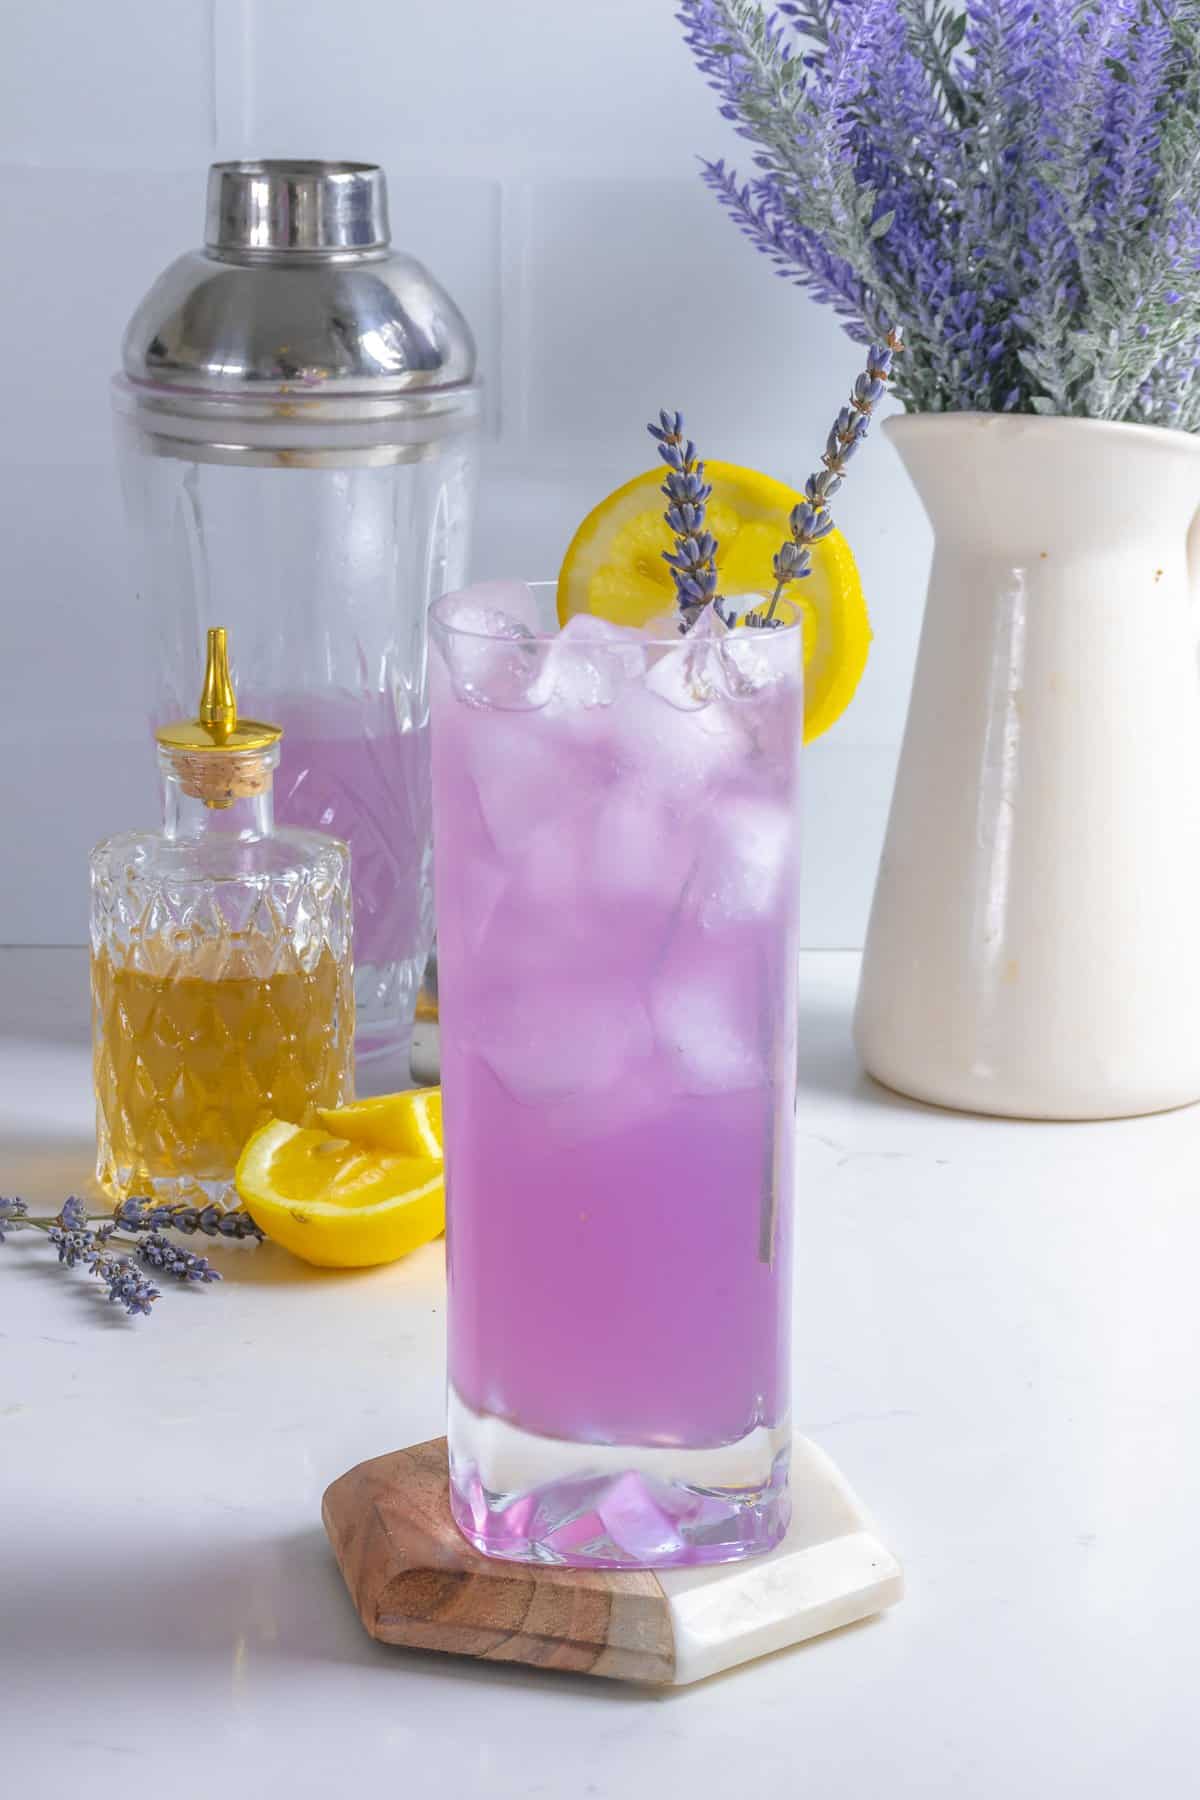 Lavender lemonade with syrup and shaker on table.